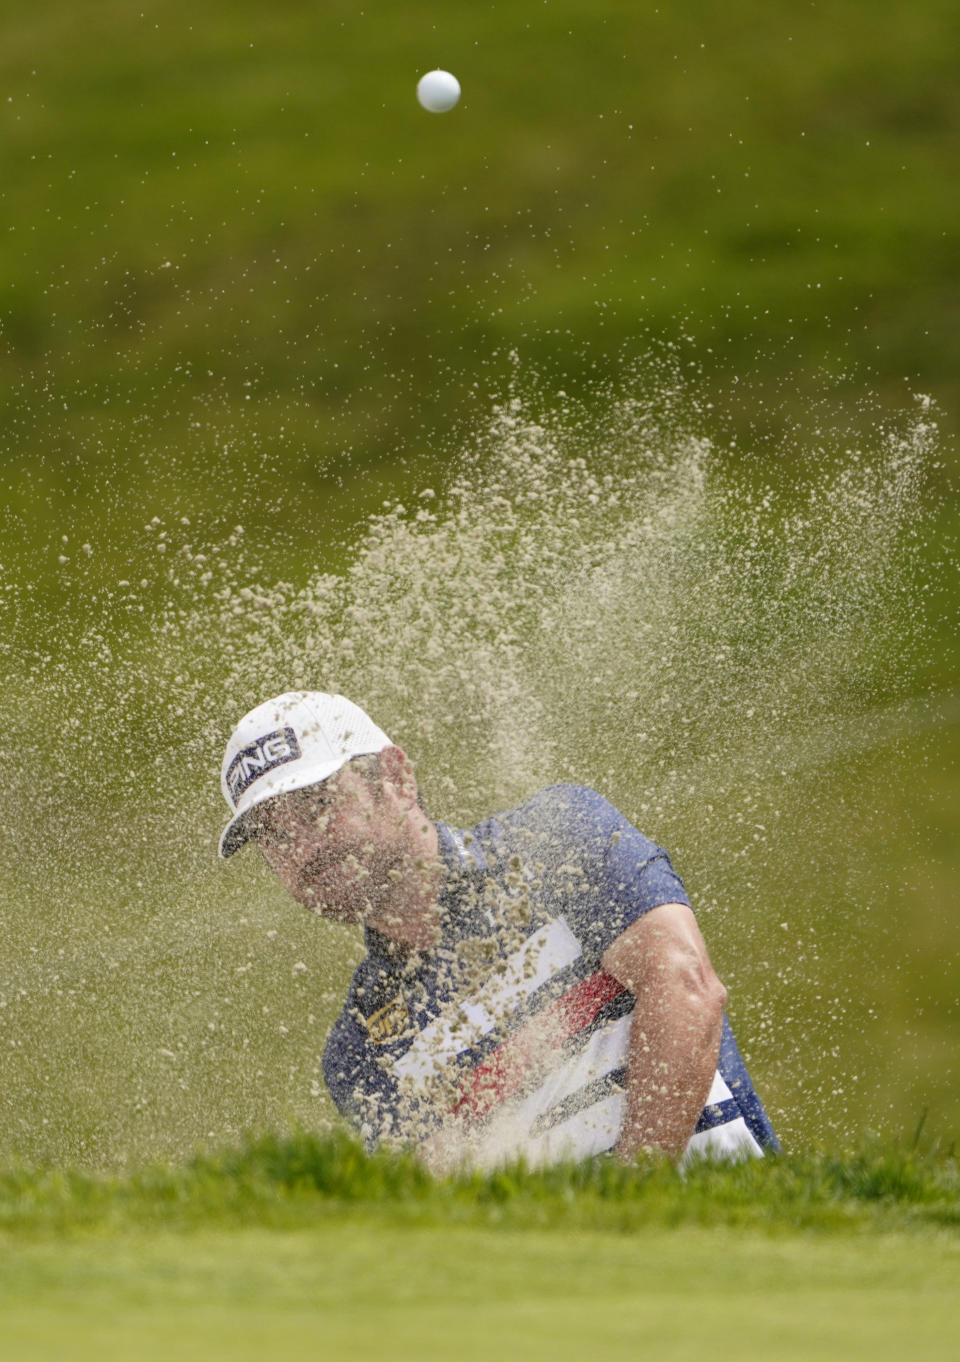 Louis Oosthuizen, of South Africa, plays a shot from a bunker on the 11th hole during the second round of the U.S. Open Golf Championship, Friday, June 18, 2021, at Torrey Pines Golf Course in San Diego. (AP Photo/Jae C. Hong)